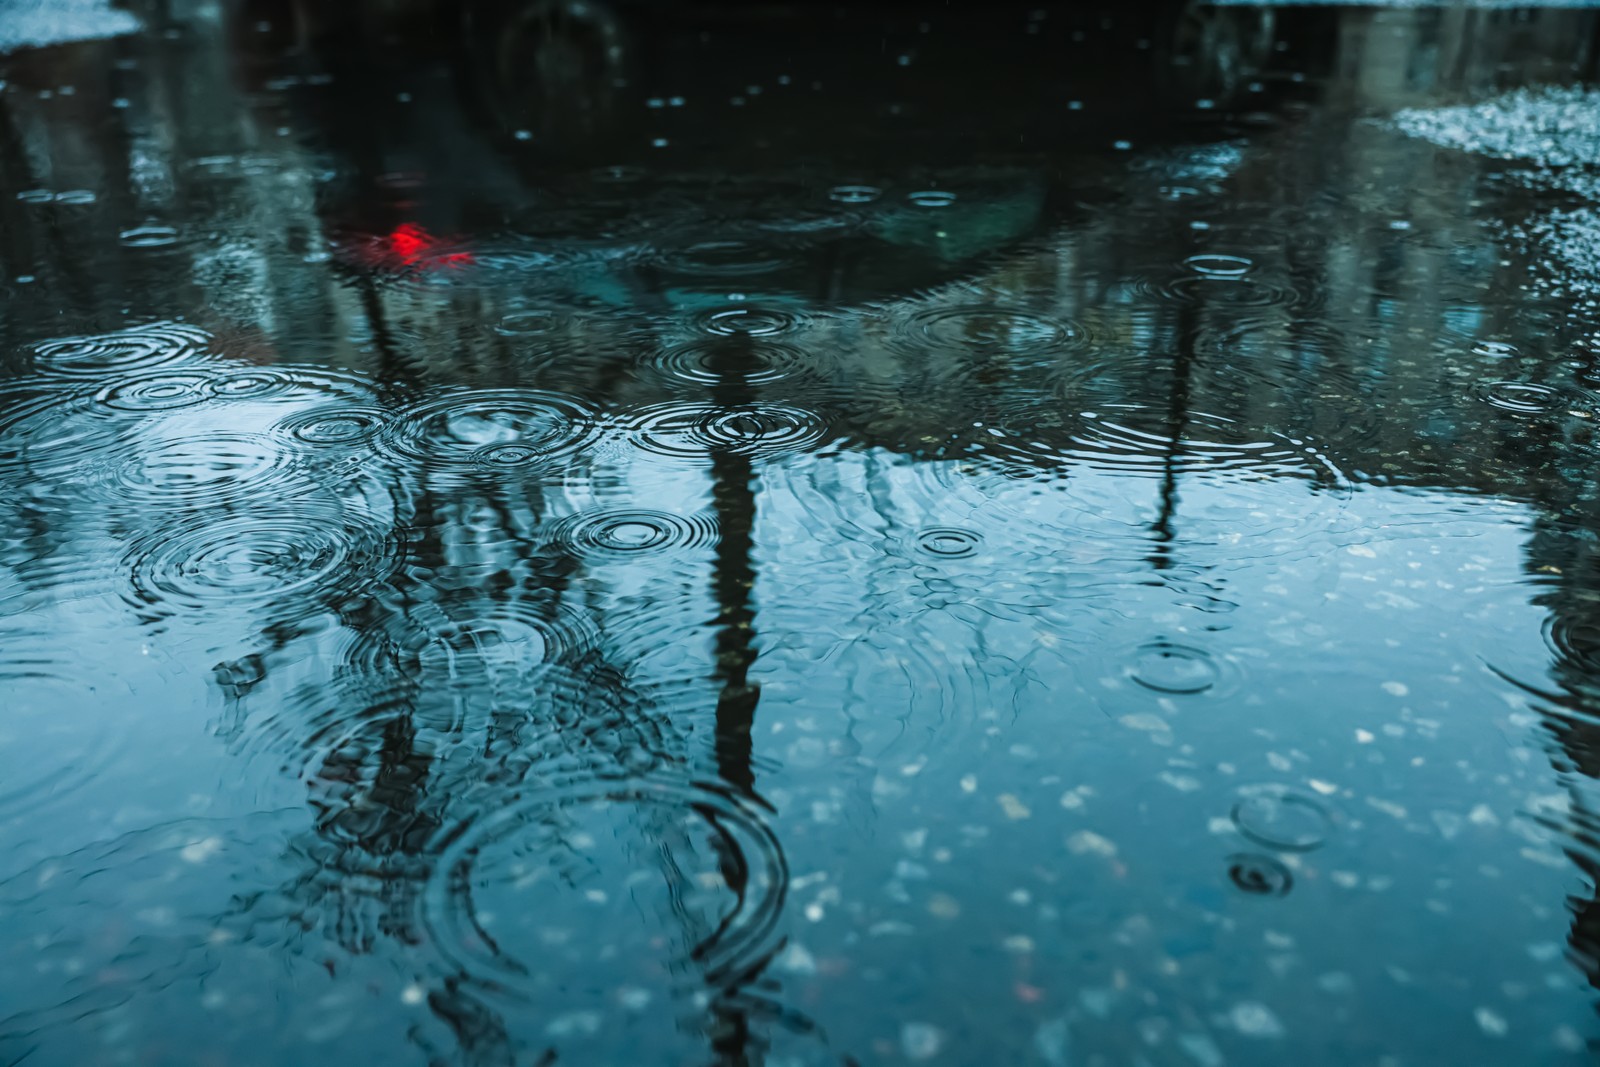 Free photo of rain drops falling down onto puddle outdoors